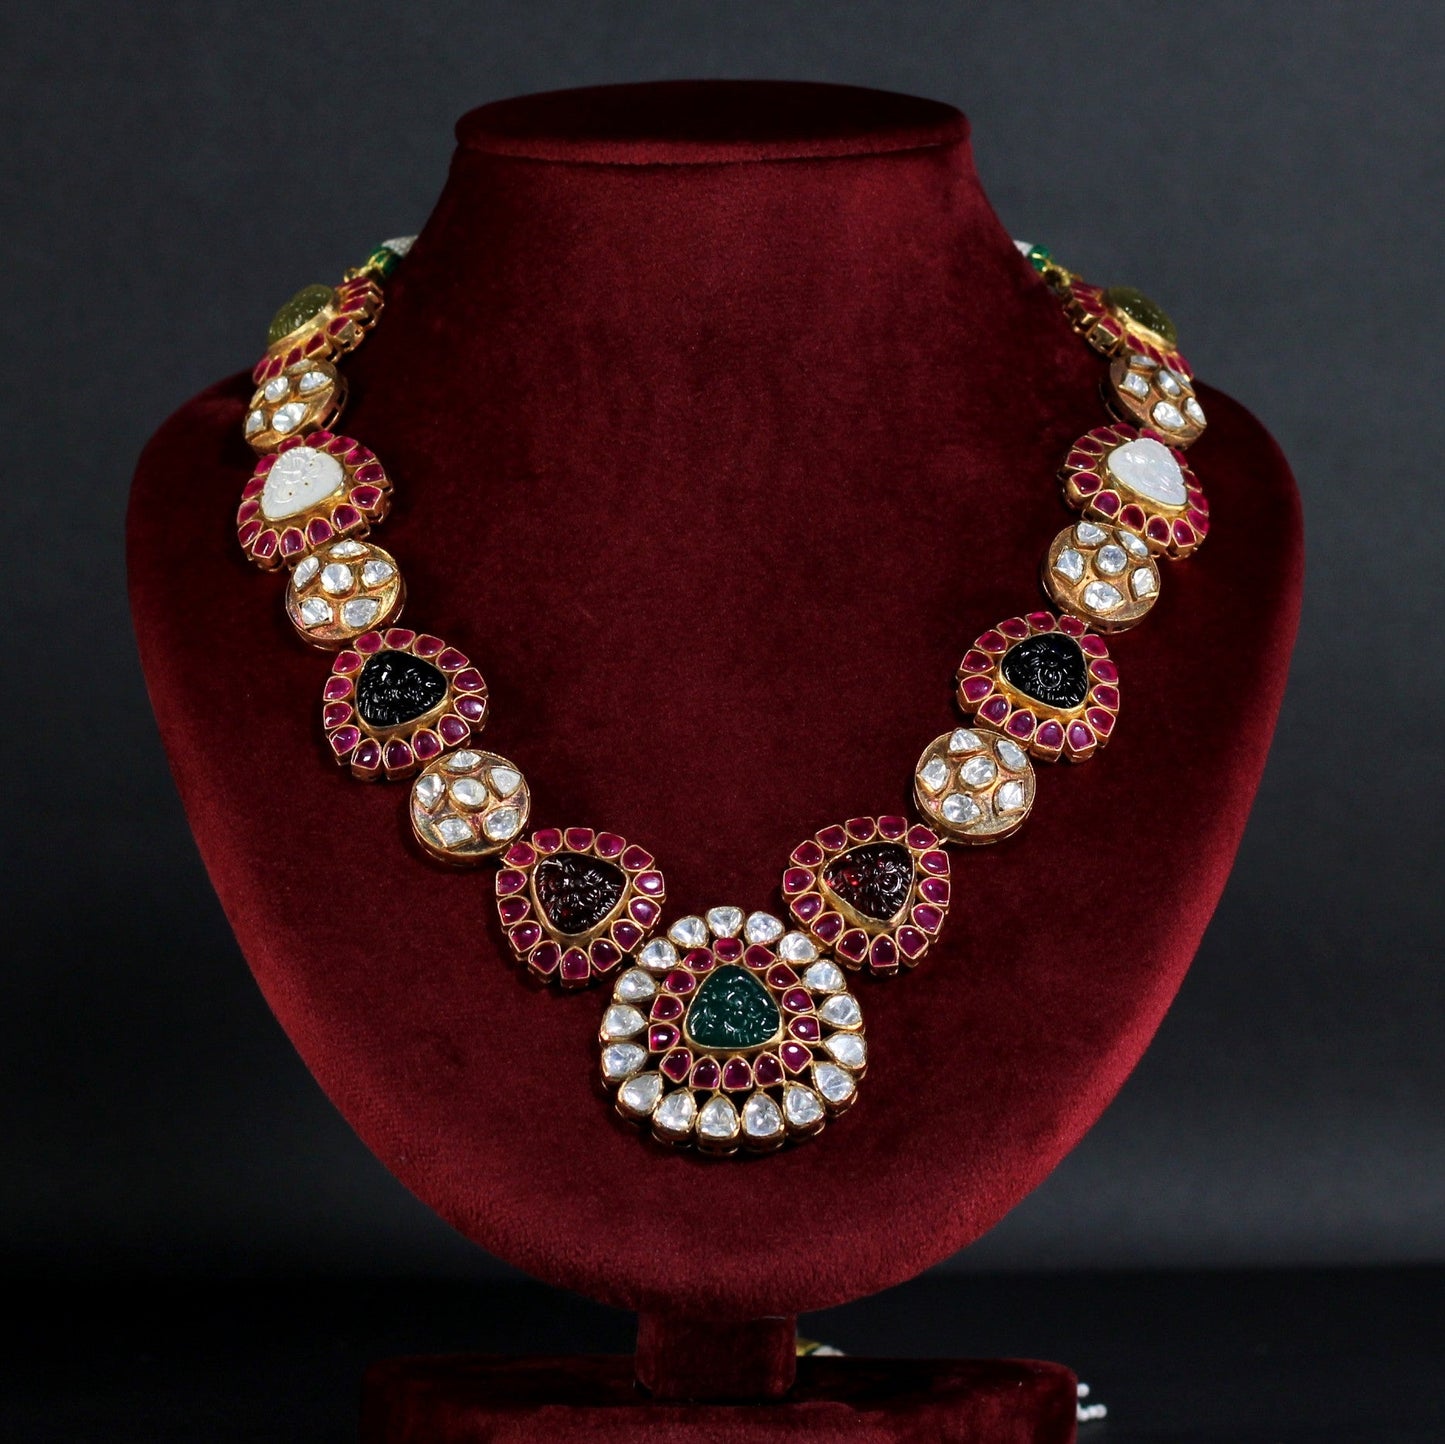 NECKLACE AND EARRING IN 92.5 STERLING SILVER IN 18KT GOLD PLATED WITH POLKI, GREEN & PINK ONYX , fluorite &  RHODOLITE